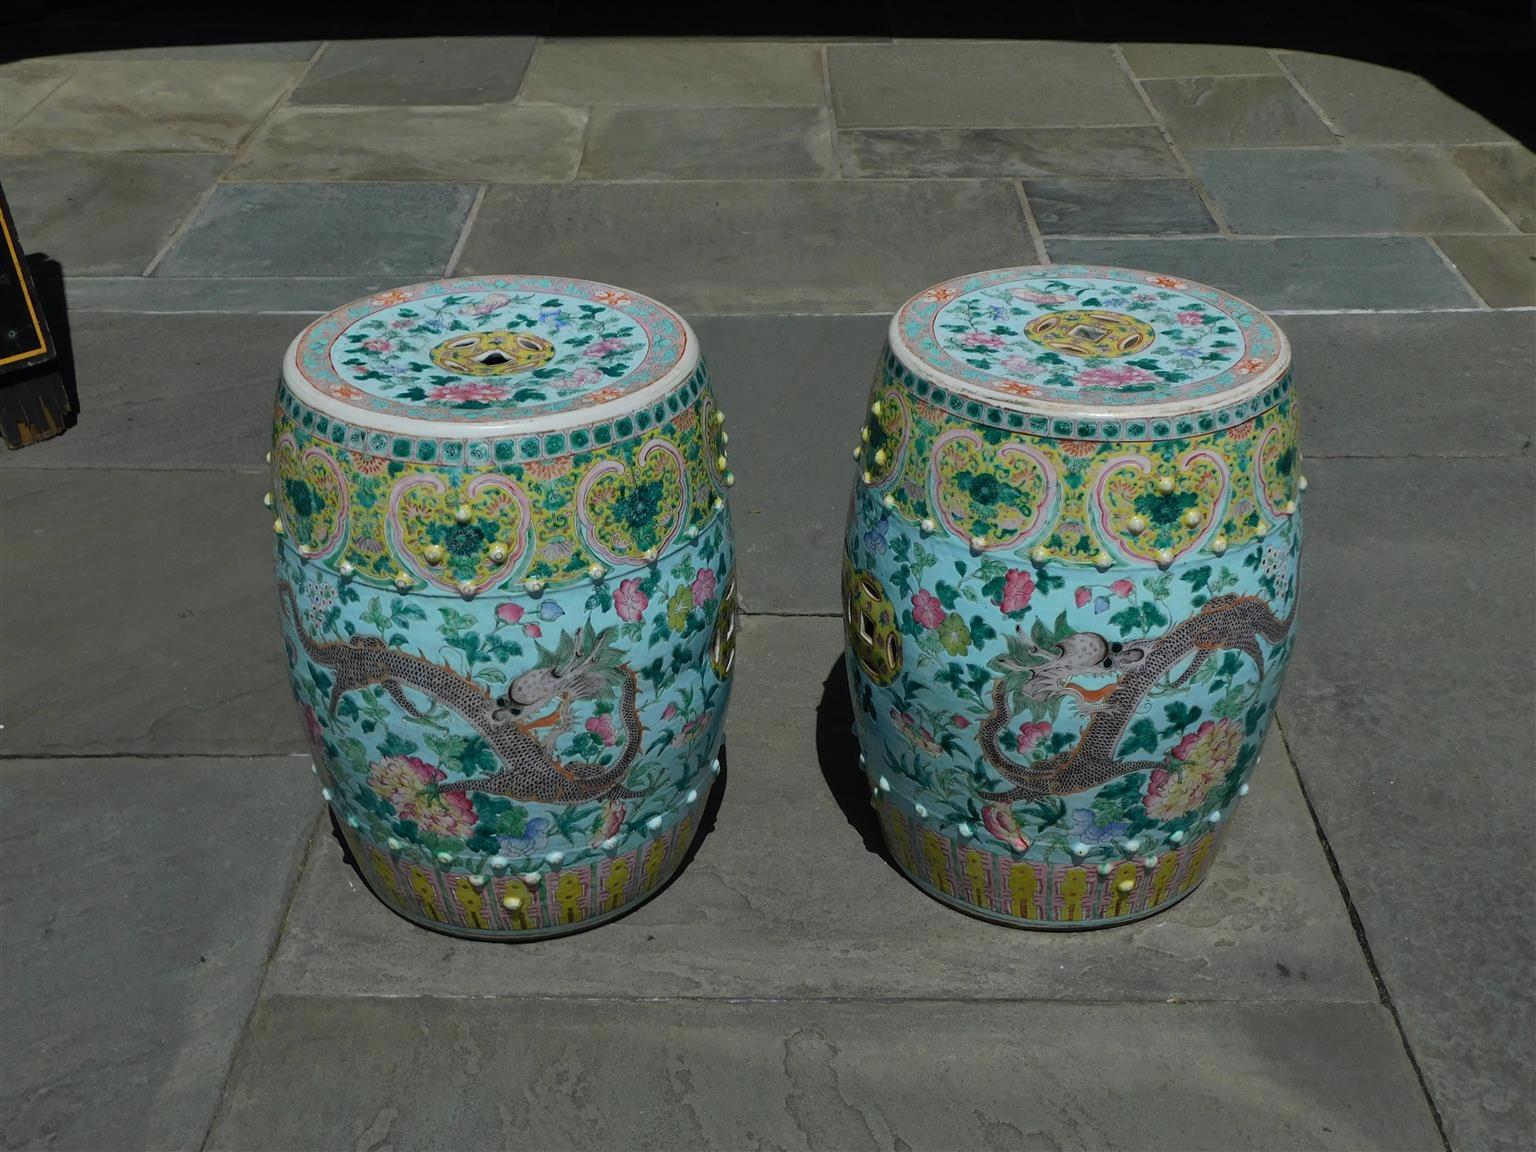 Pair of Chinese Porcelain Painted Garden Seats w/ Dragons & Exotic Birds, C 1820 For Sale 3